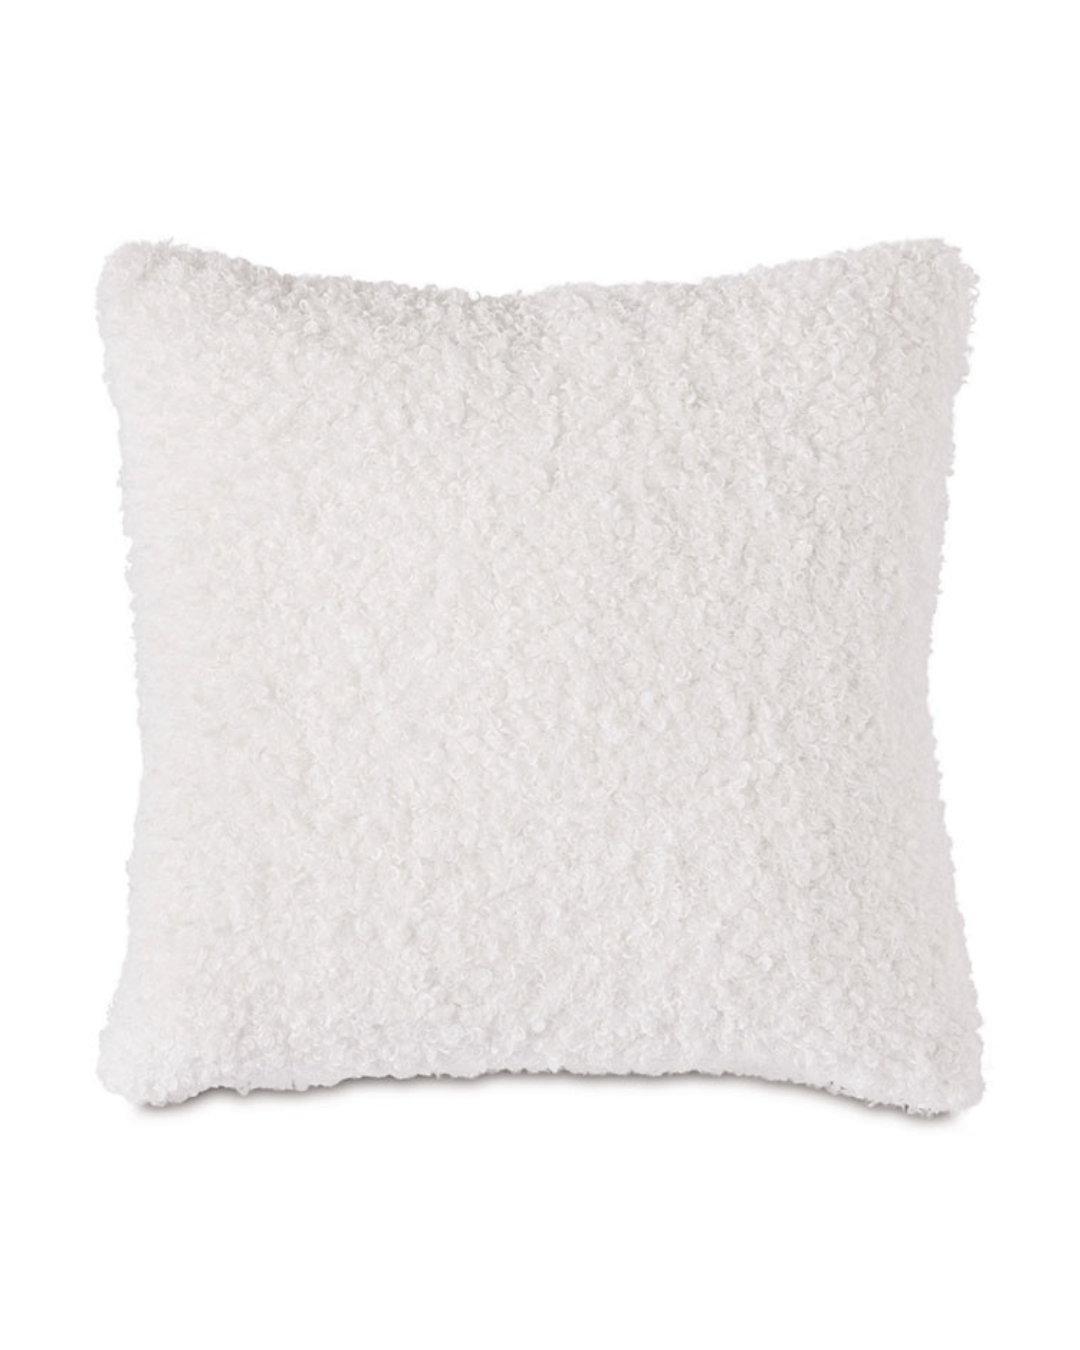 A square, ivory Euro sham with a textured, plush surface. This fluffy pillow features a deluxe down feather insert, making it soft and comfortable—perfect for home decor or for use on a couch or bed. The **Ivory Doodle Decorative Pillow 27x27** by **Eastern Accents** is an ideal addition to any space.